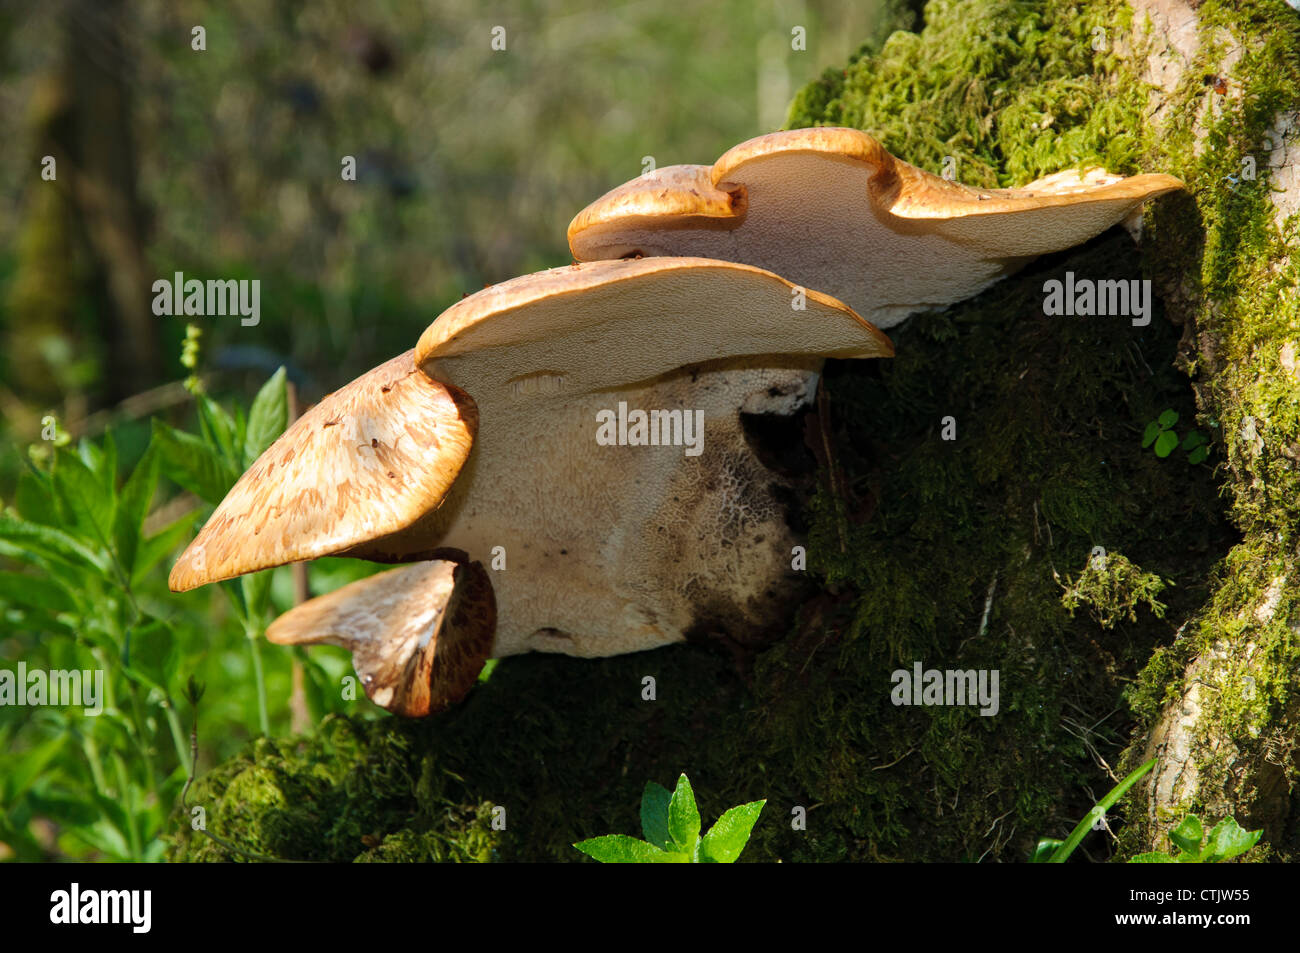 The fruiting bodies of dryad's saddle (Polyporus squamosus) growing on a moss covered tree stump at Hale, Cumbria. April. Stock Photo